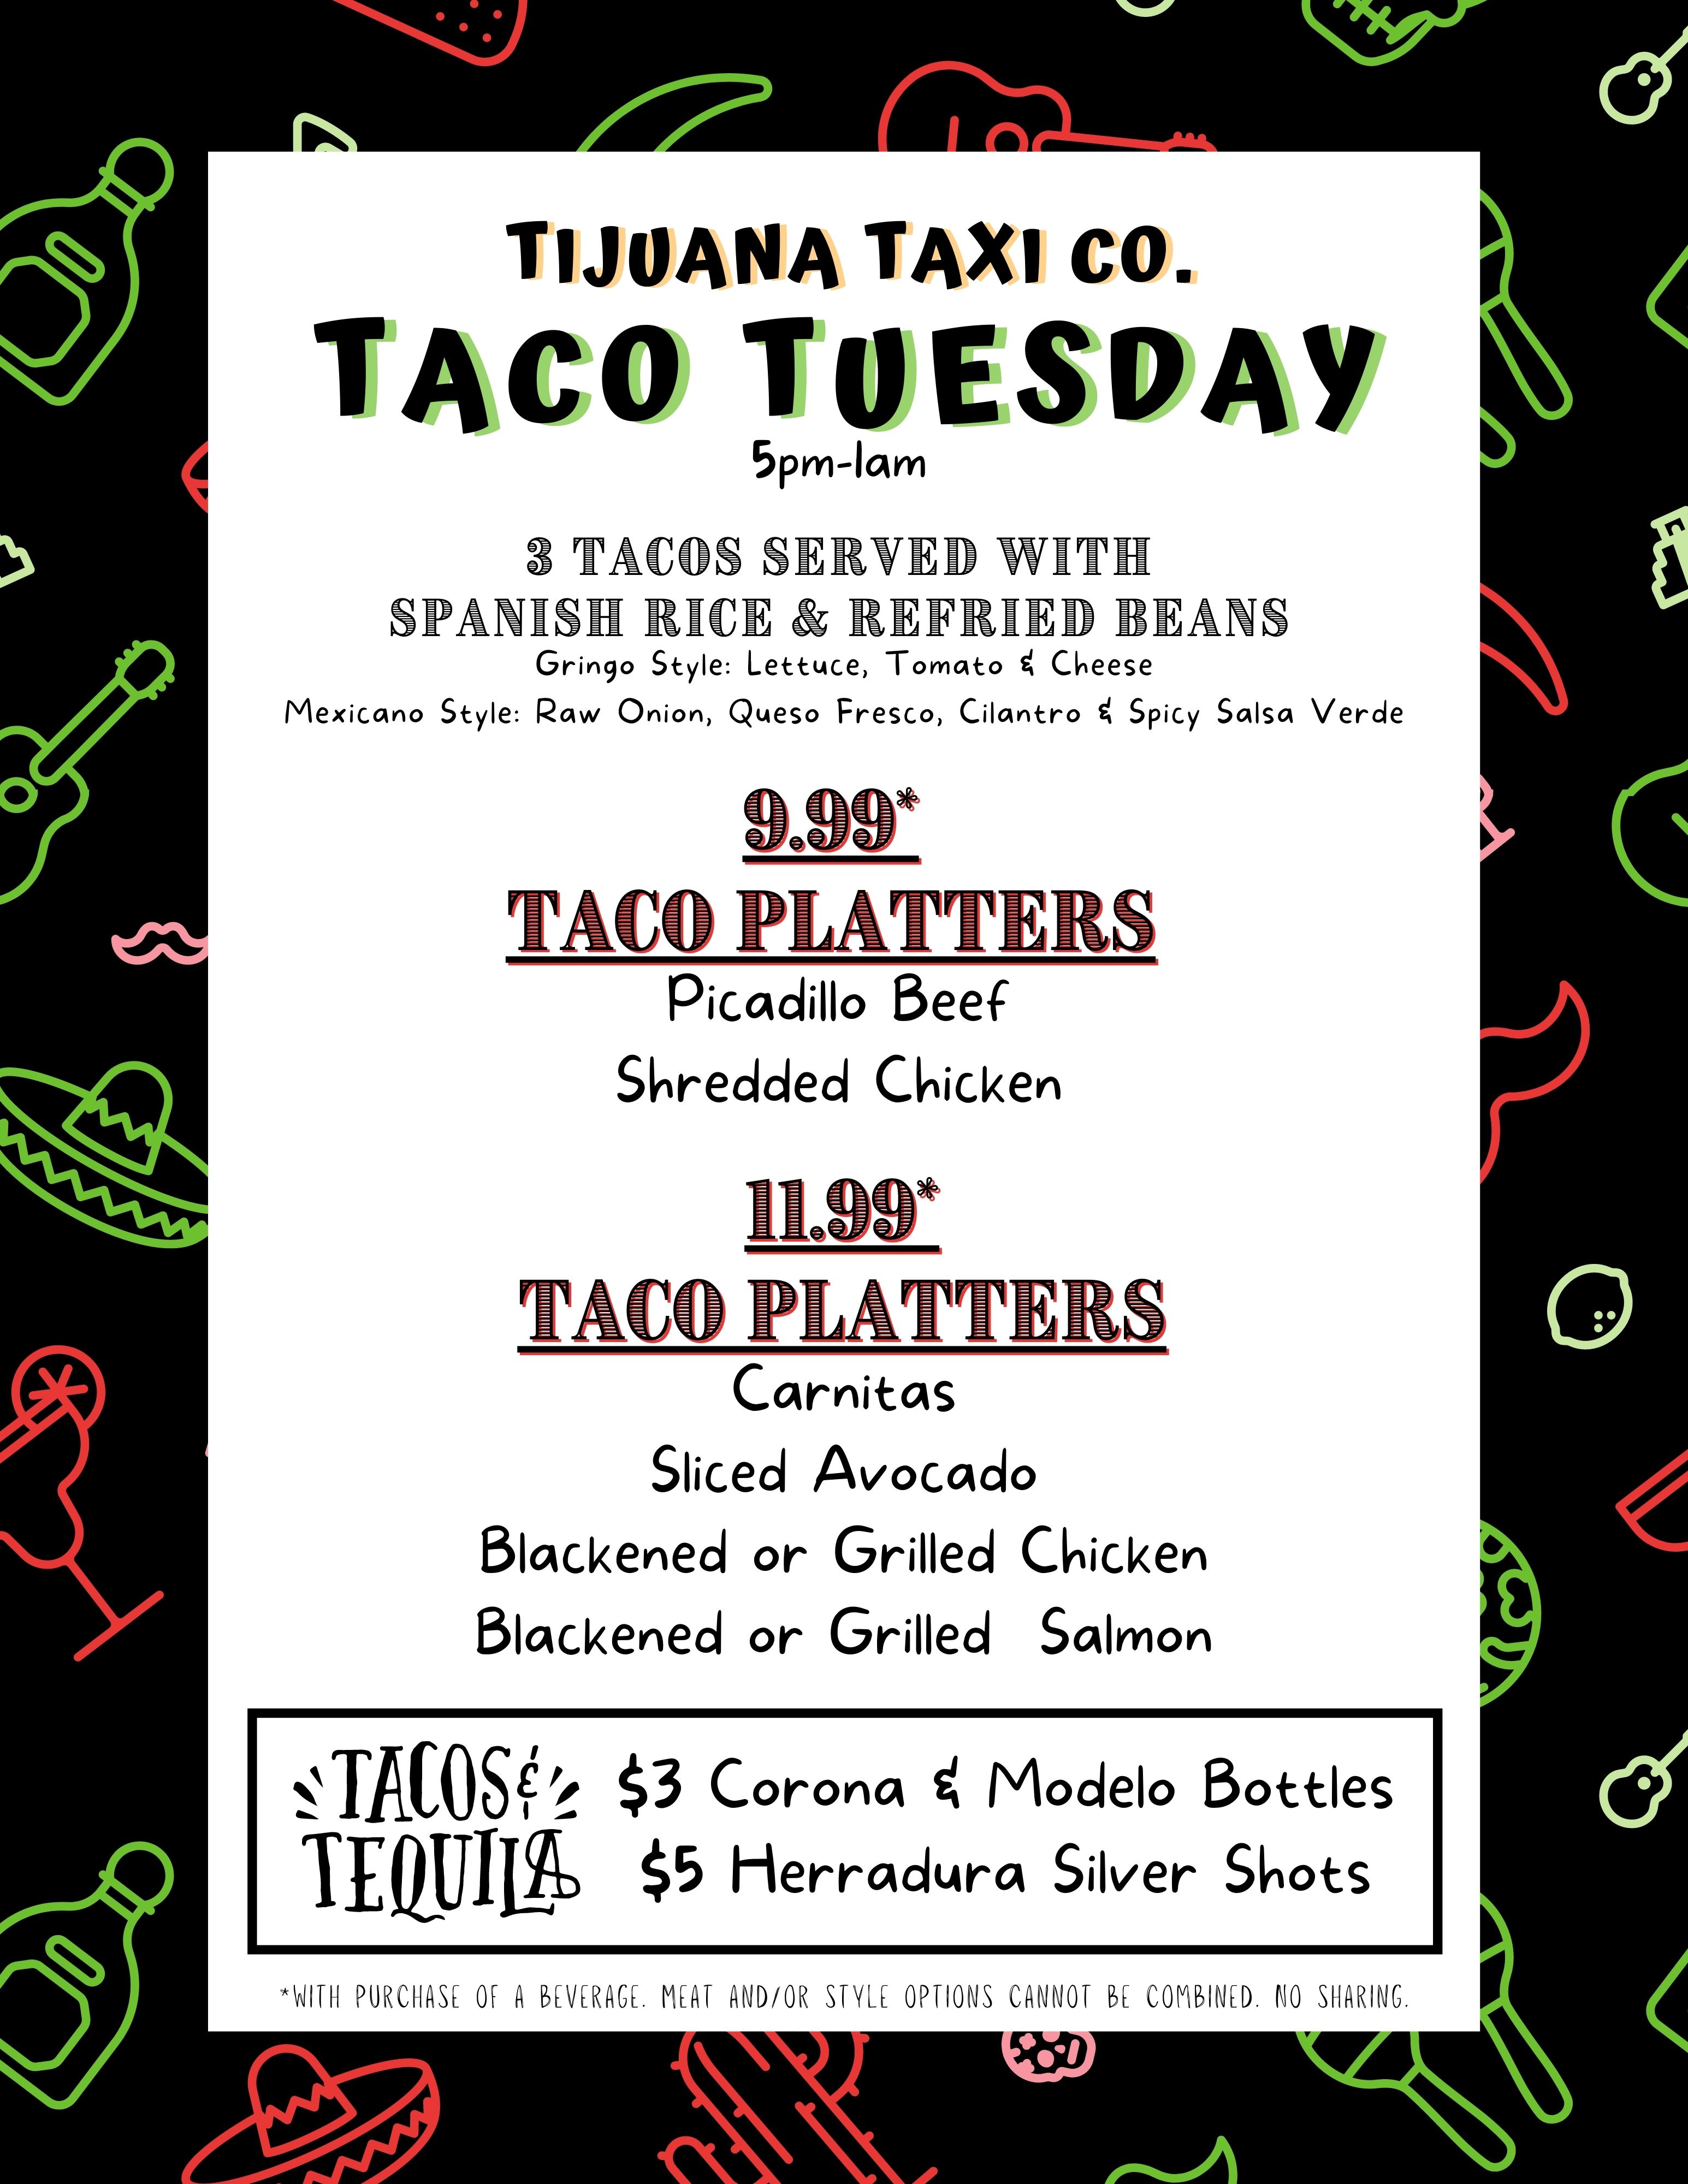 Taco Tuesday, Tijuana Taxi, Mexican Food Near Me, Coral Springs